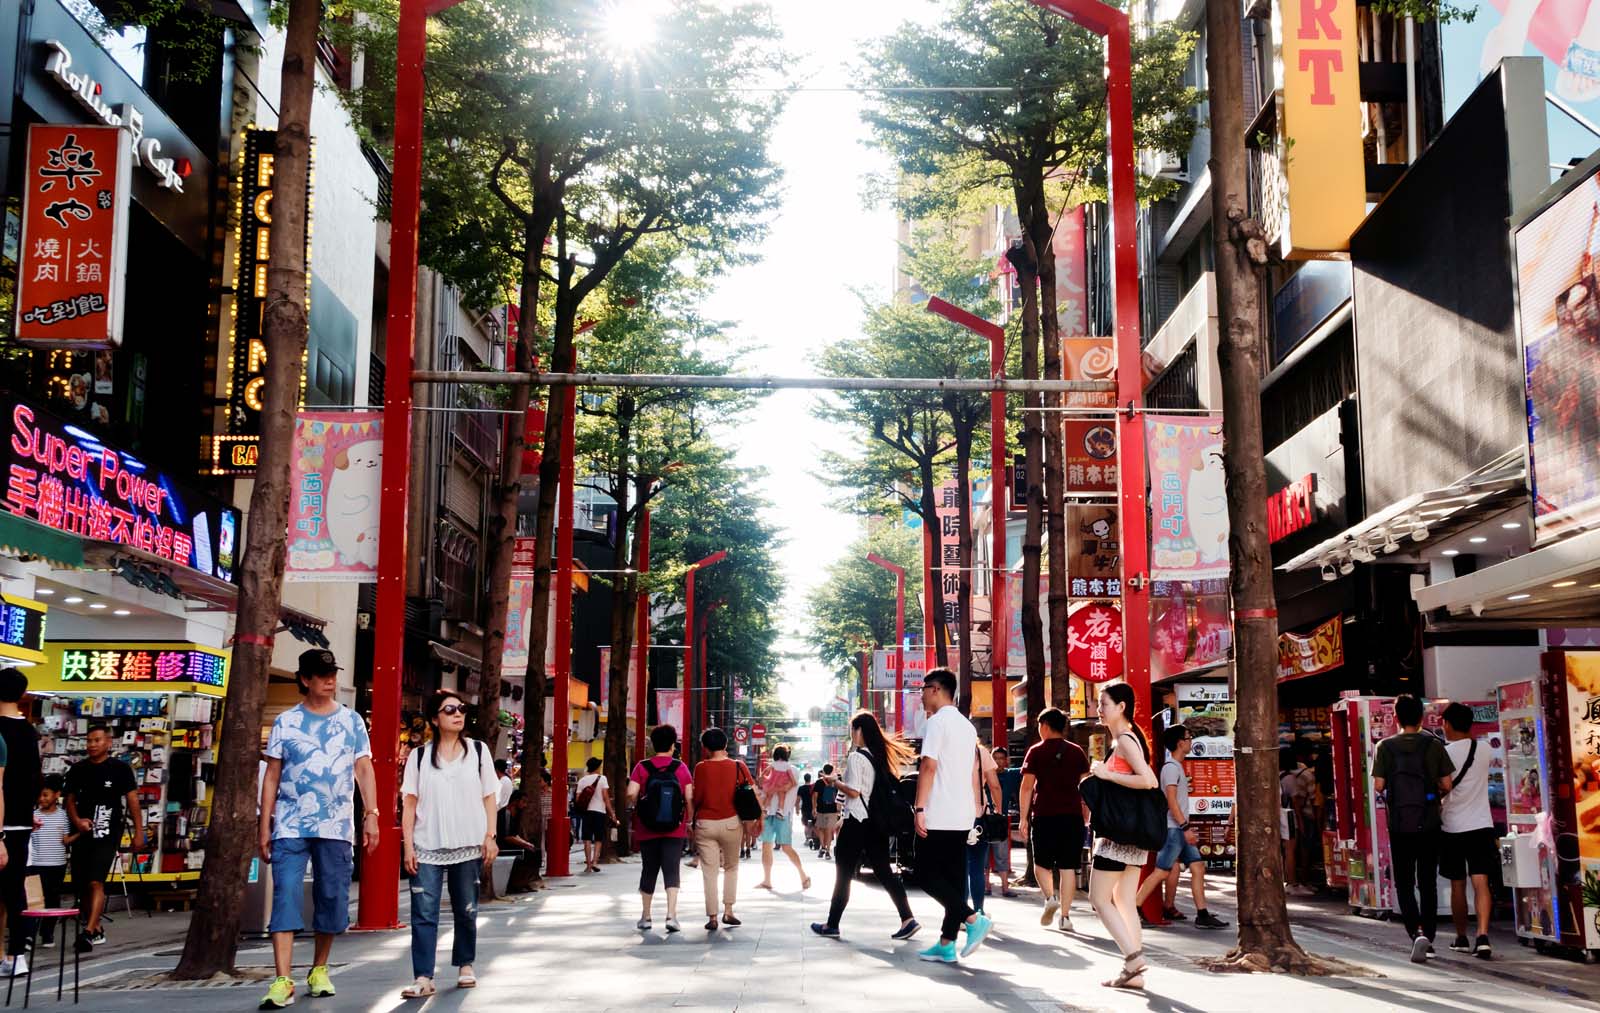 Ximending, a popular shopping district in